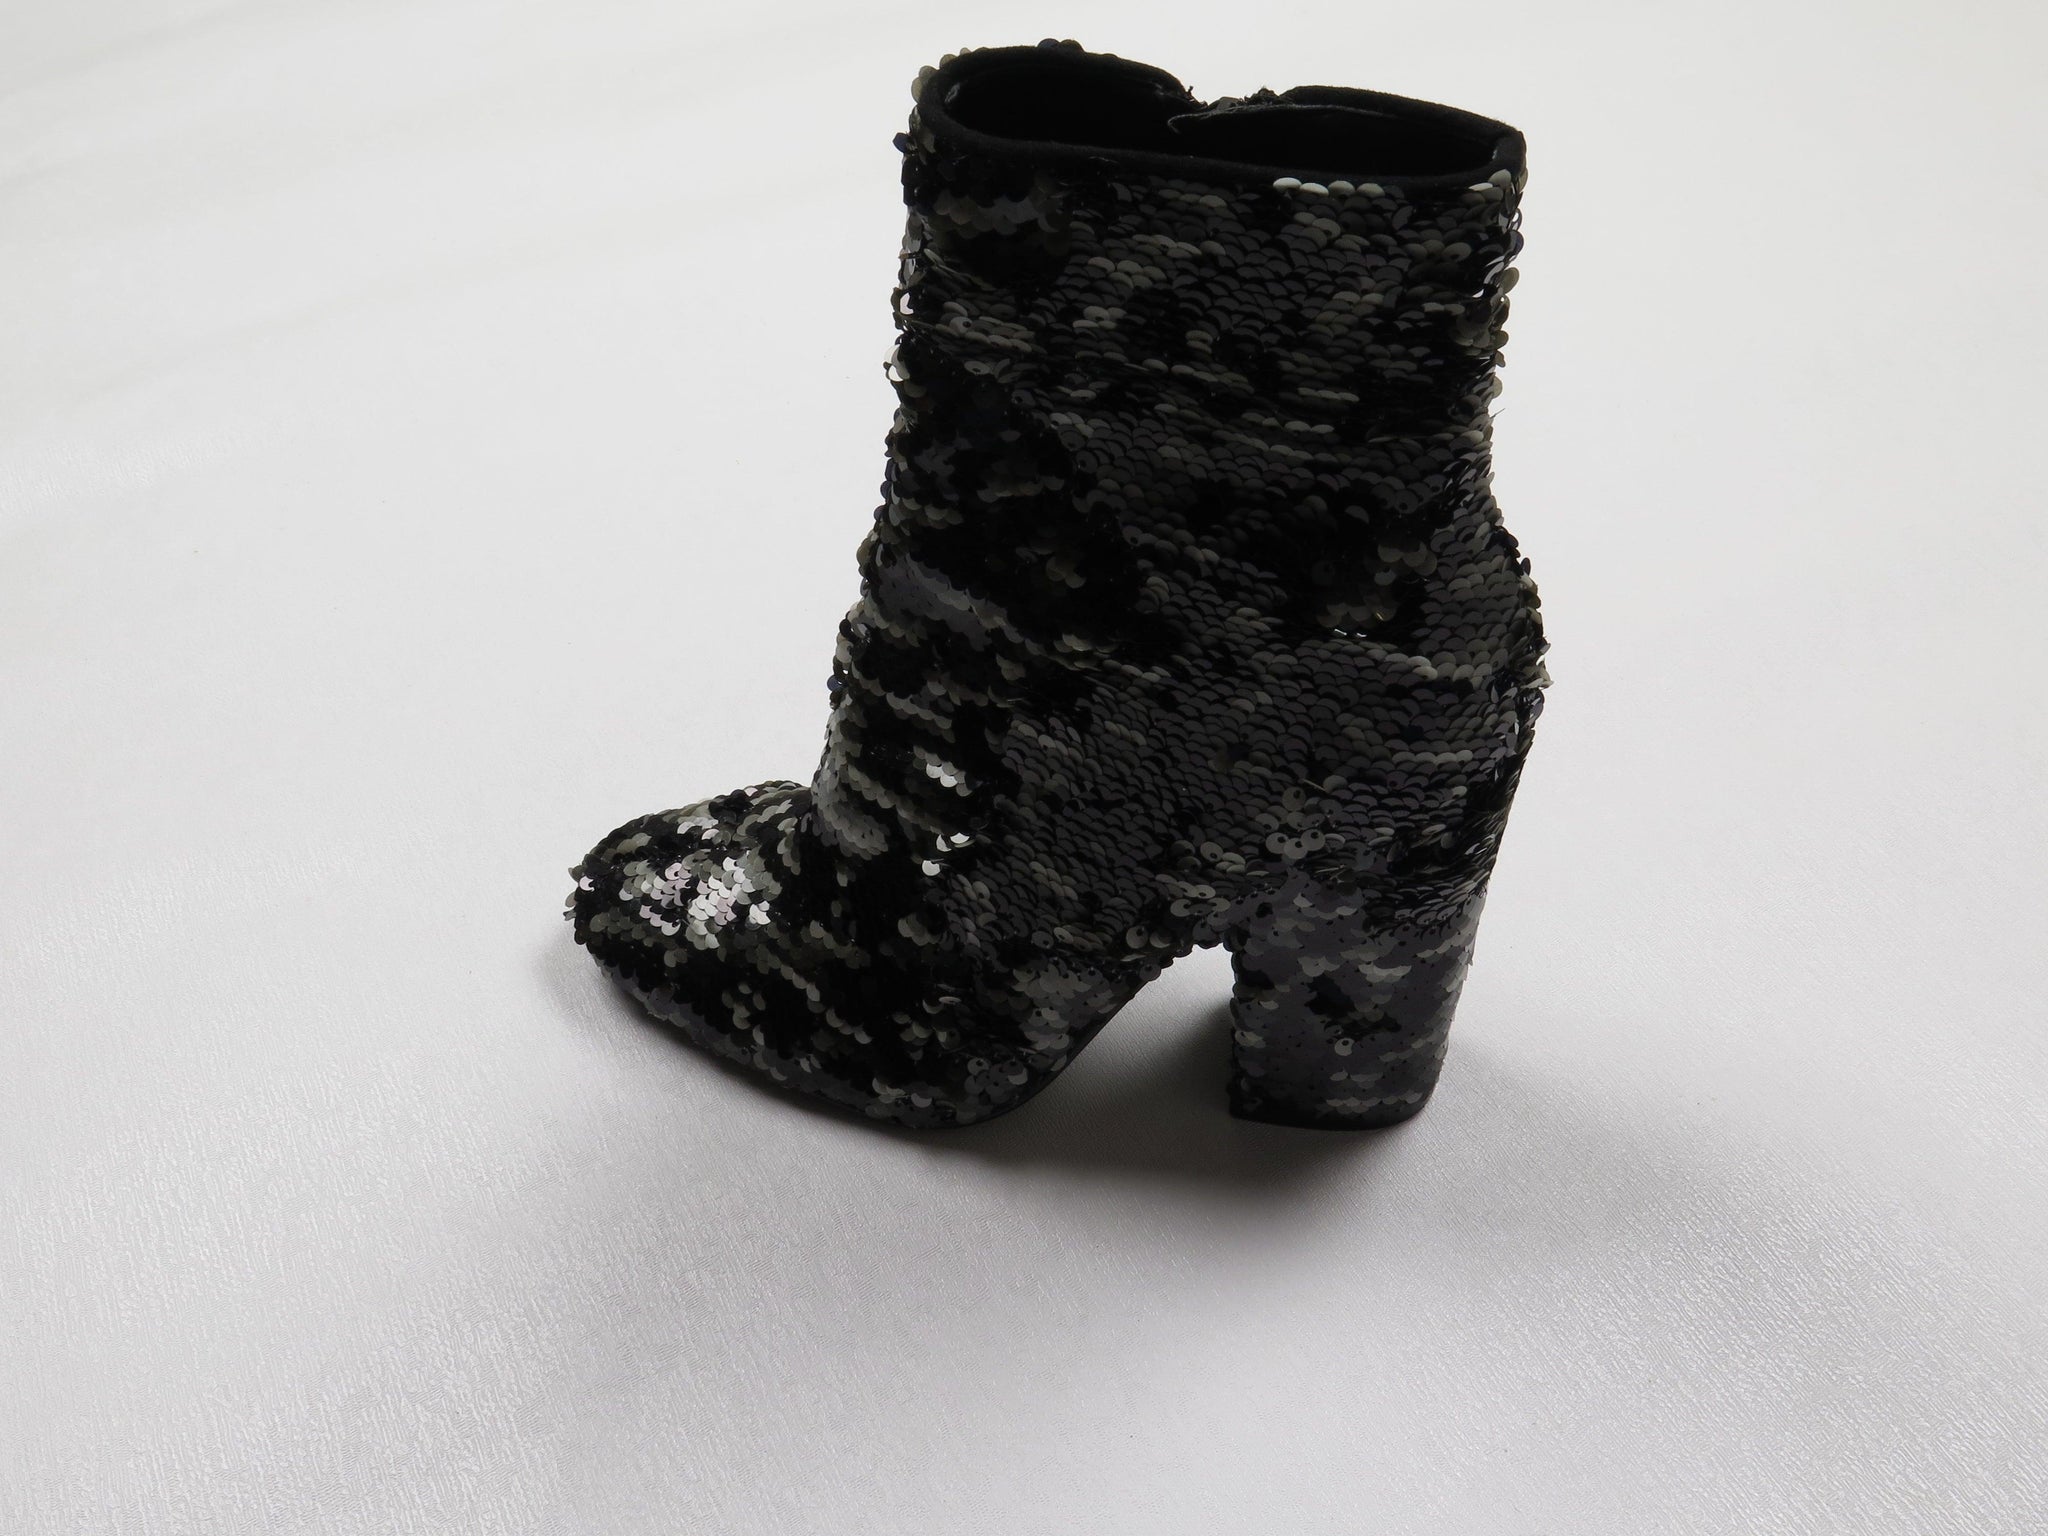 Kendal & Kylie Sequin Boots UK 5 US 7 - The Harlequin